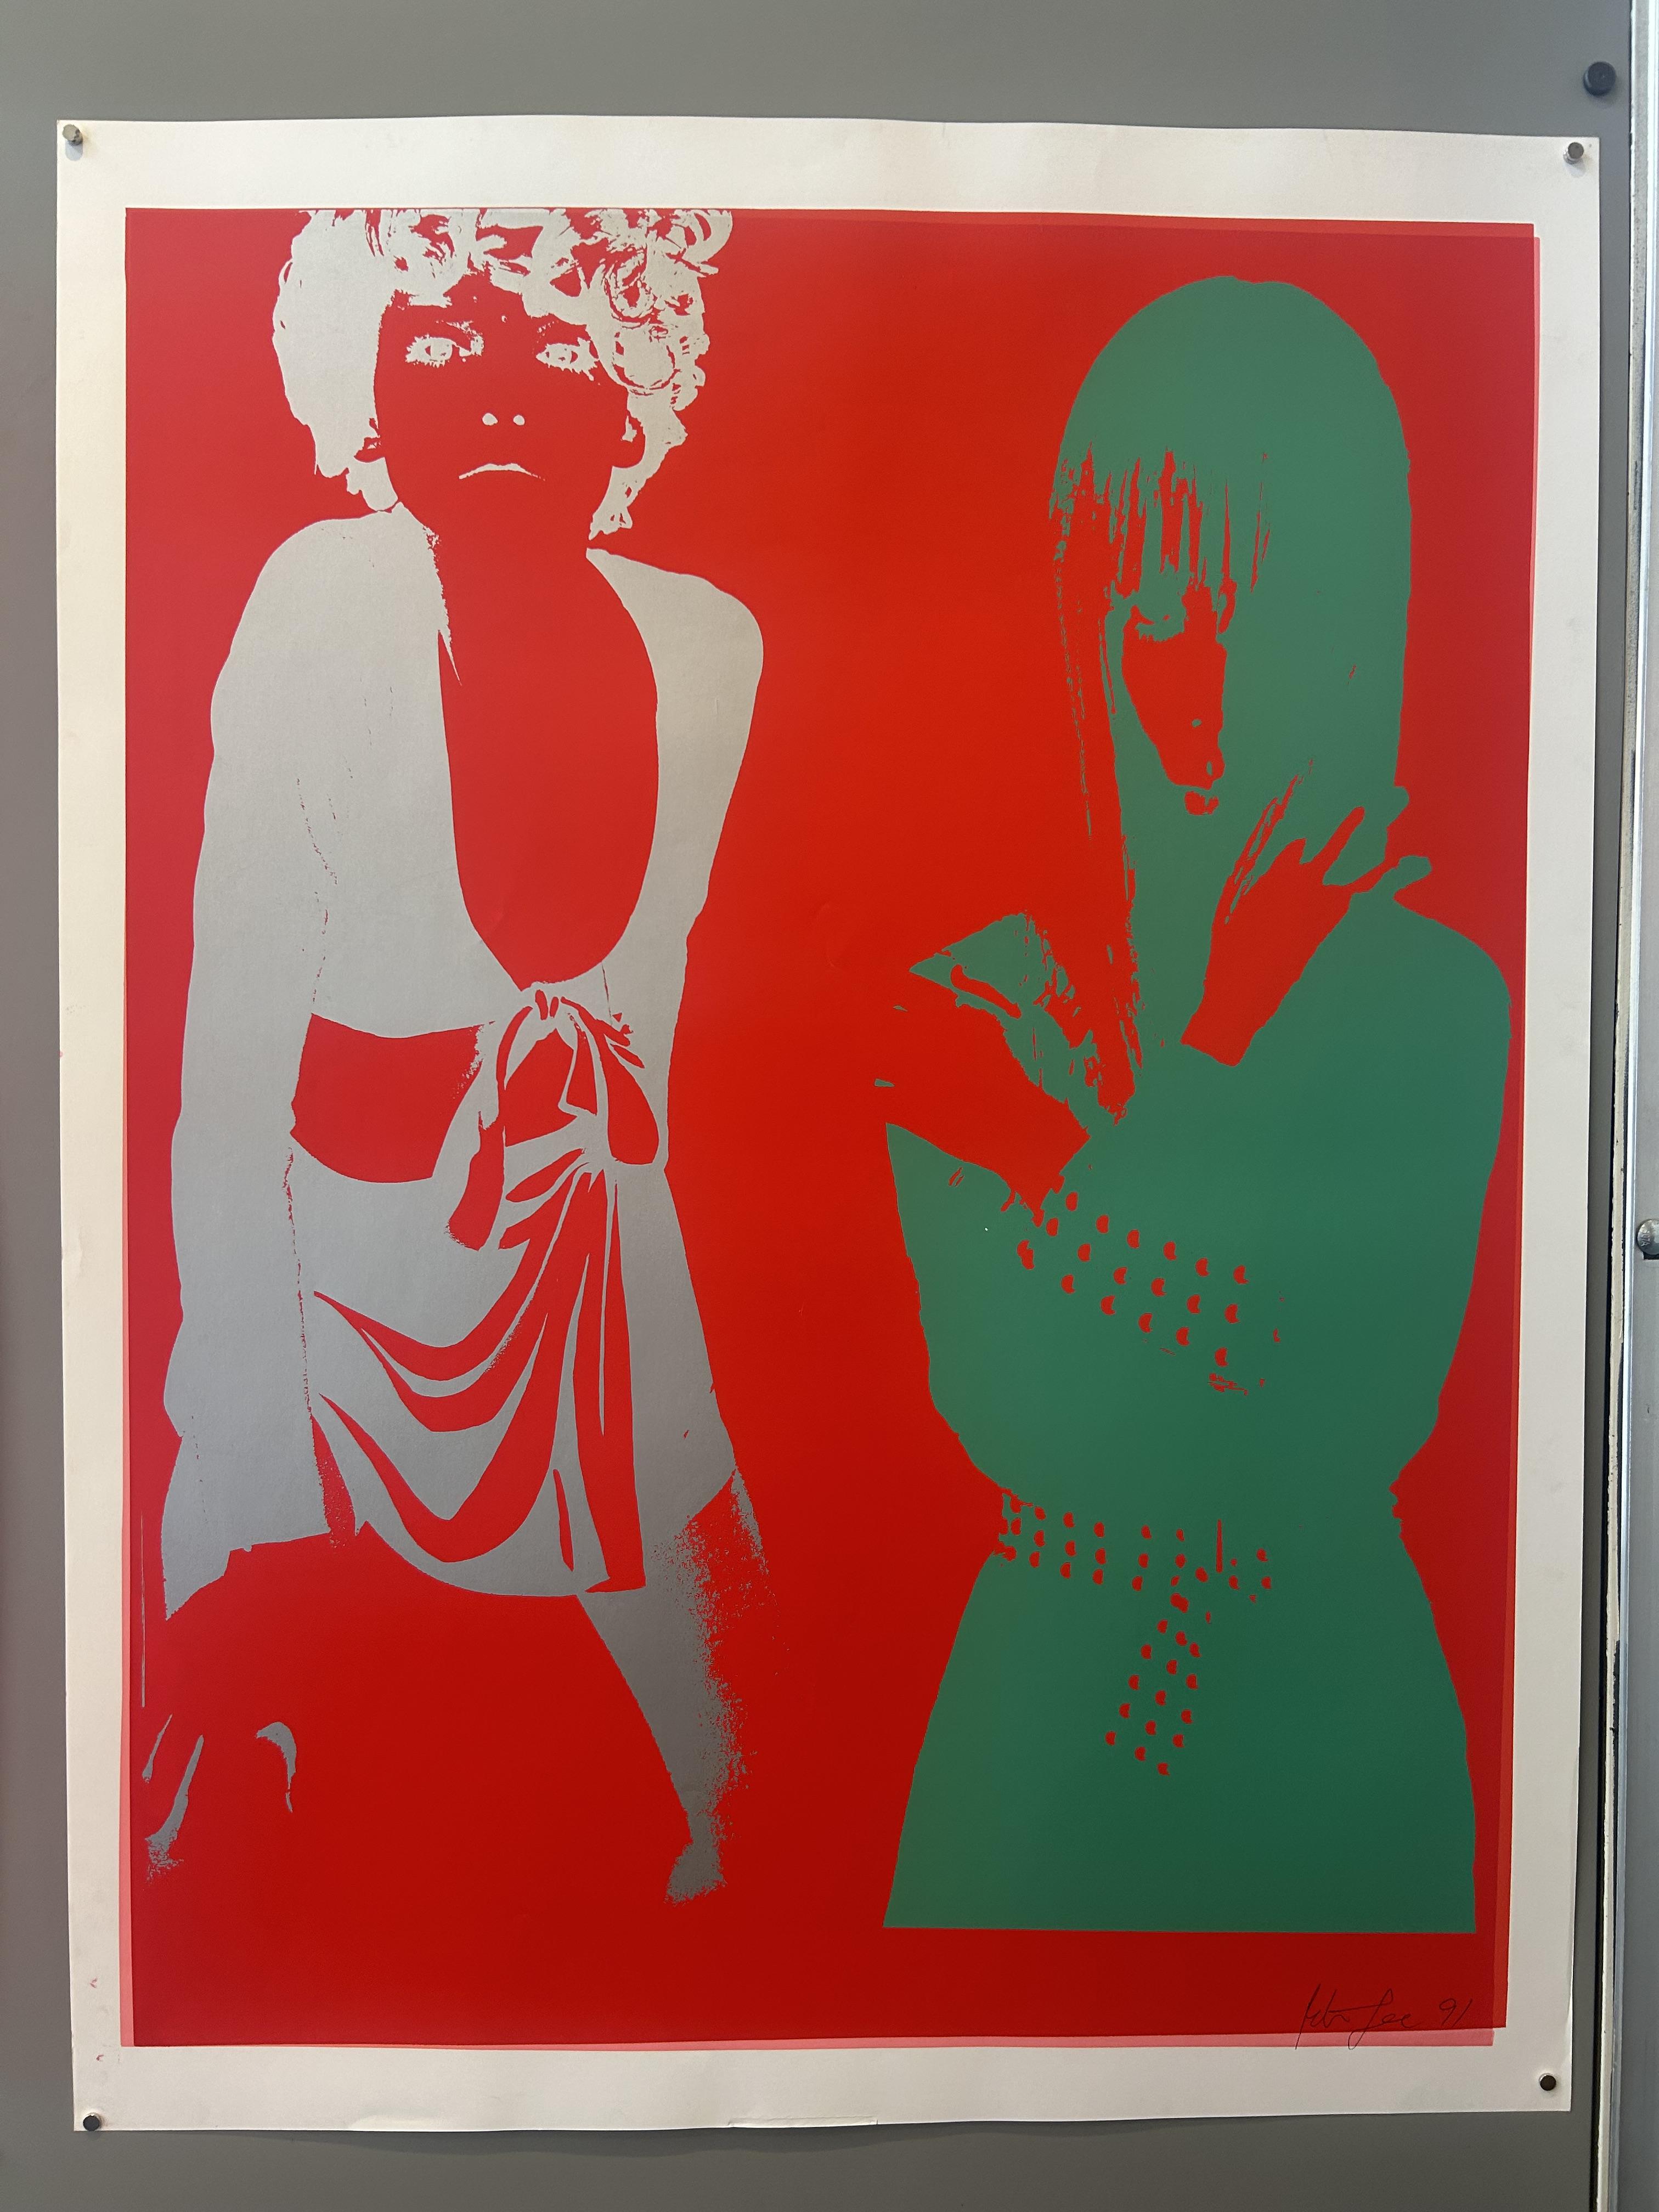 Two pop-art style images of women are side by side, with a red background. The women are in silver and teal.